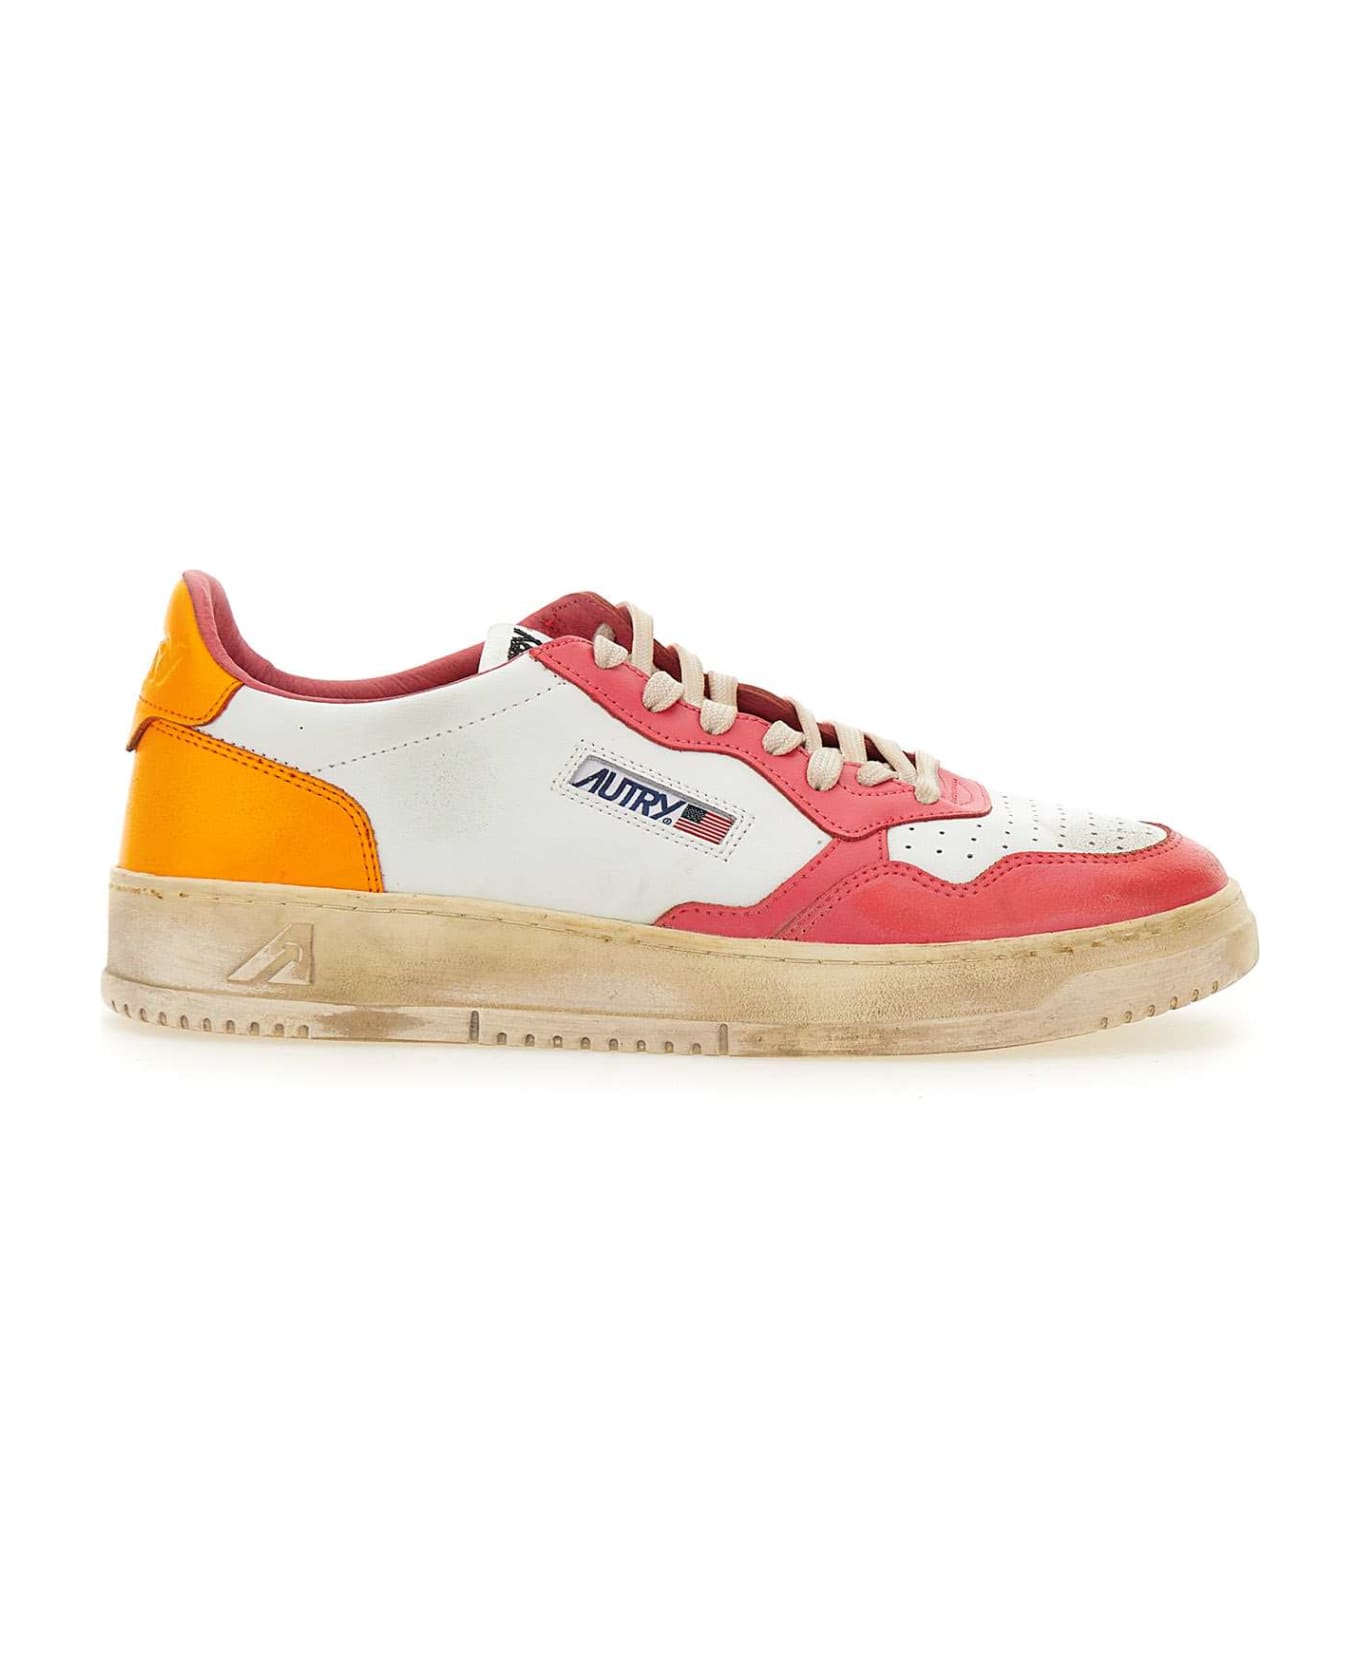 Autry 'avlm Sv31' Sneakers Leather - MULTICOLOR スニーカー